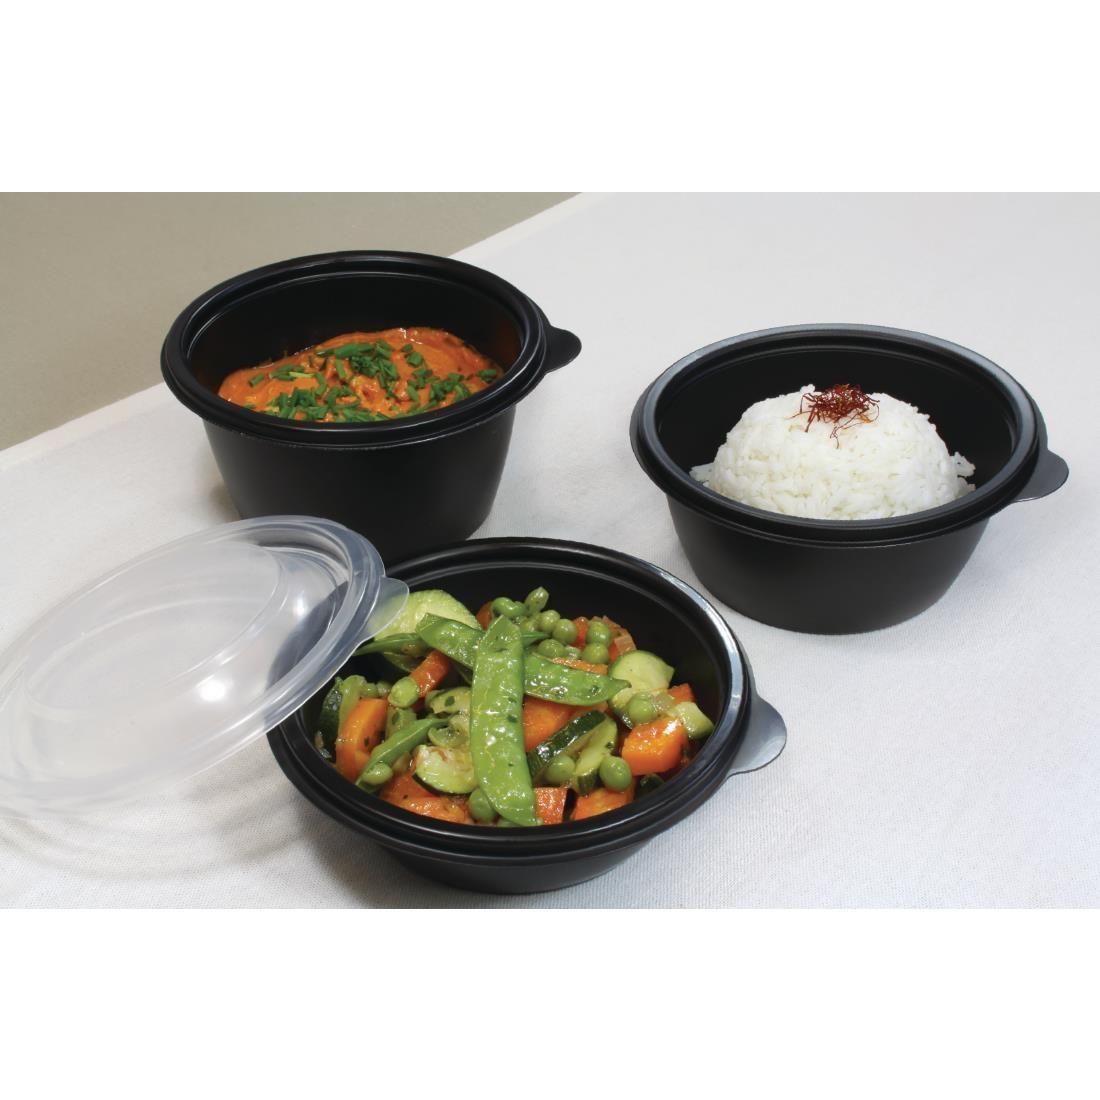 Fastpac Small Round Food Containers 375ml / 13oz (Pack of 500) - DW788  - 5